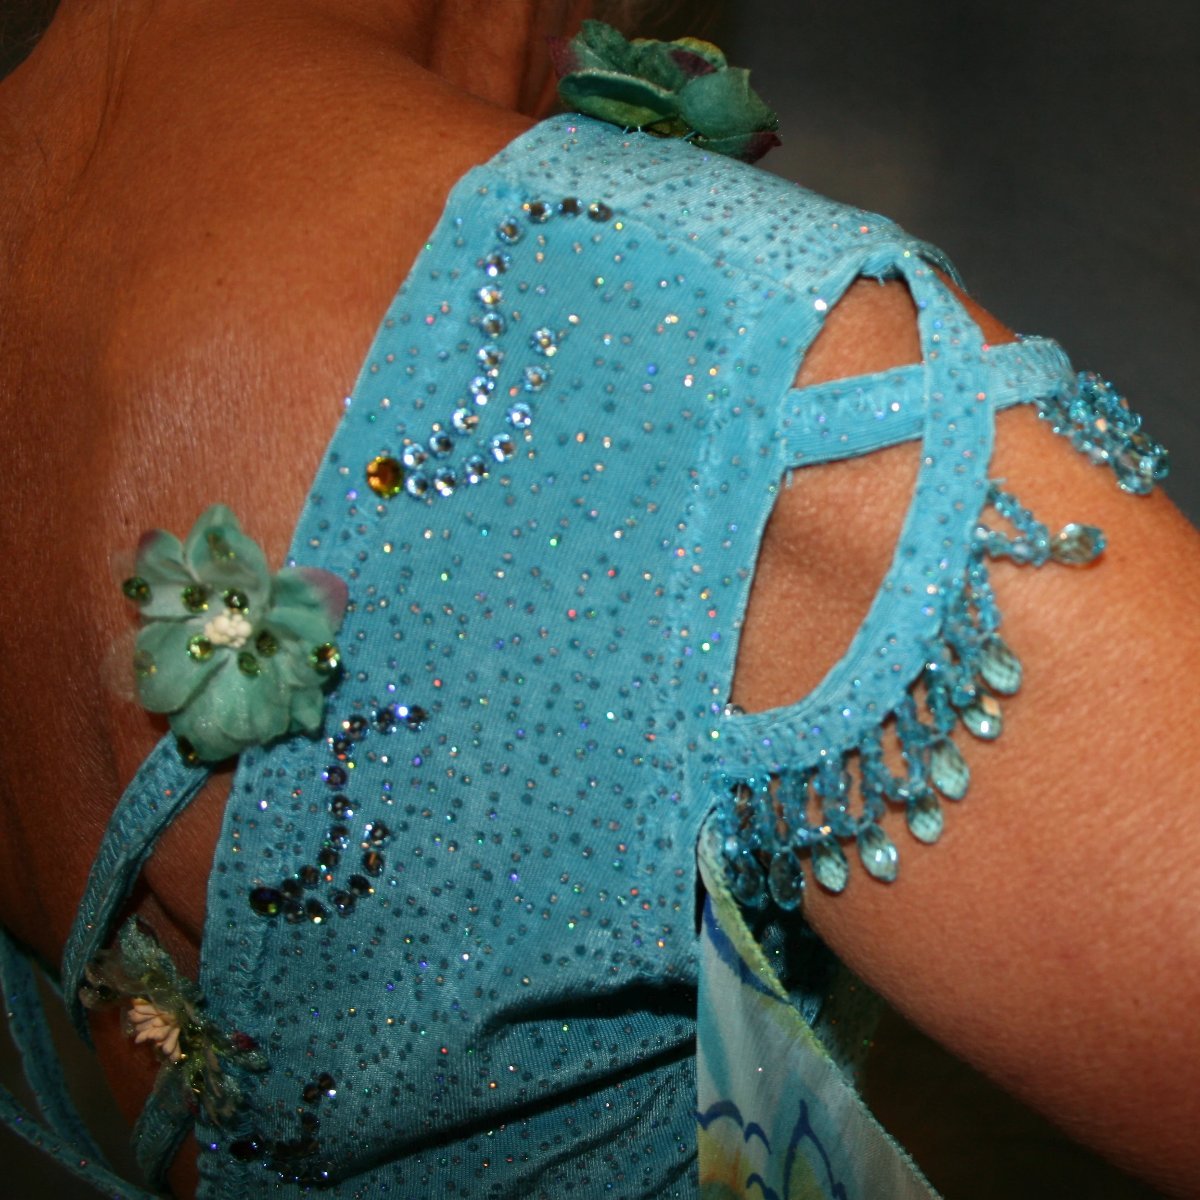 Crystal's Creations close up view of shoulder details on Turquoise ballroom dress of turquoise glitter slinky features lattice work detailing with yards & yards of print chiffon, enhanced with velveteen flowers plus aquamarine Swarovski rhinestones, hand beading on shoulder detailing... with detachable floats.